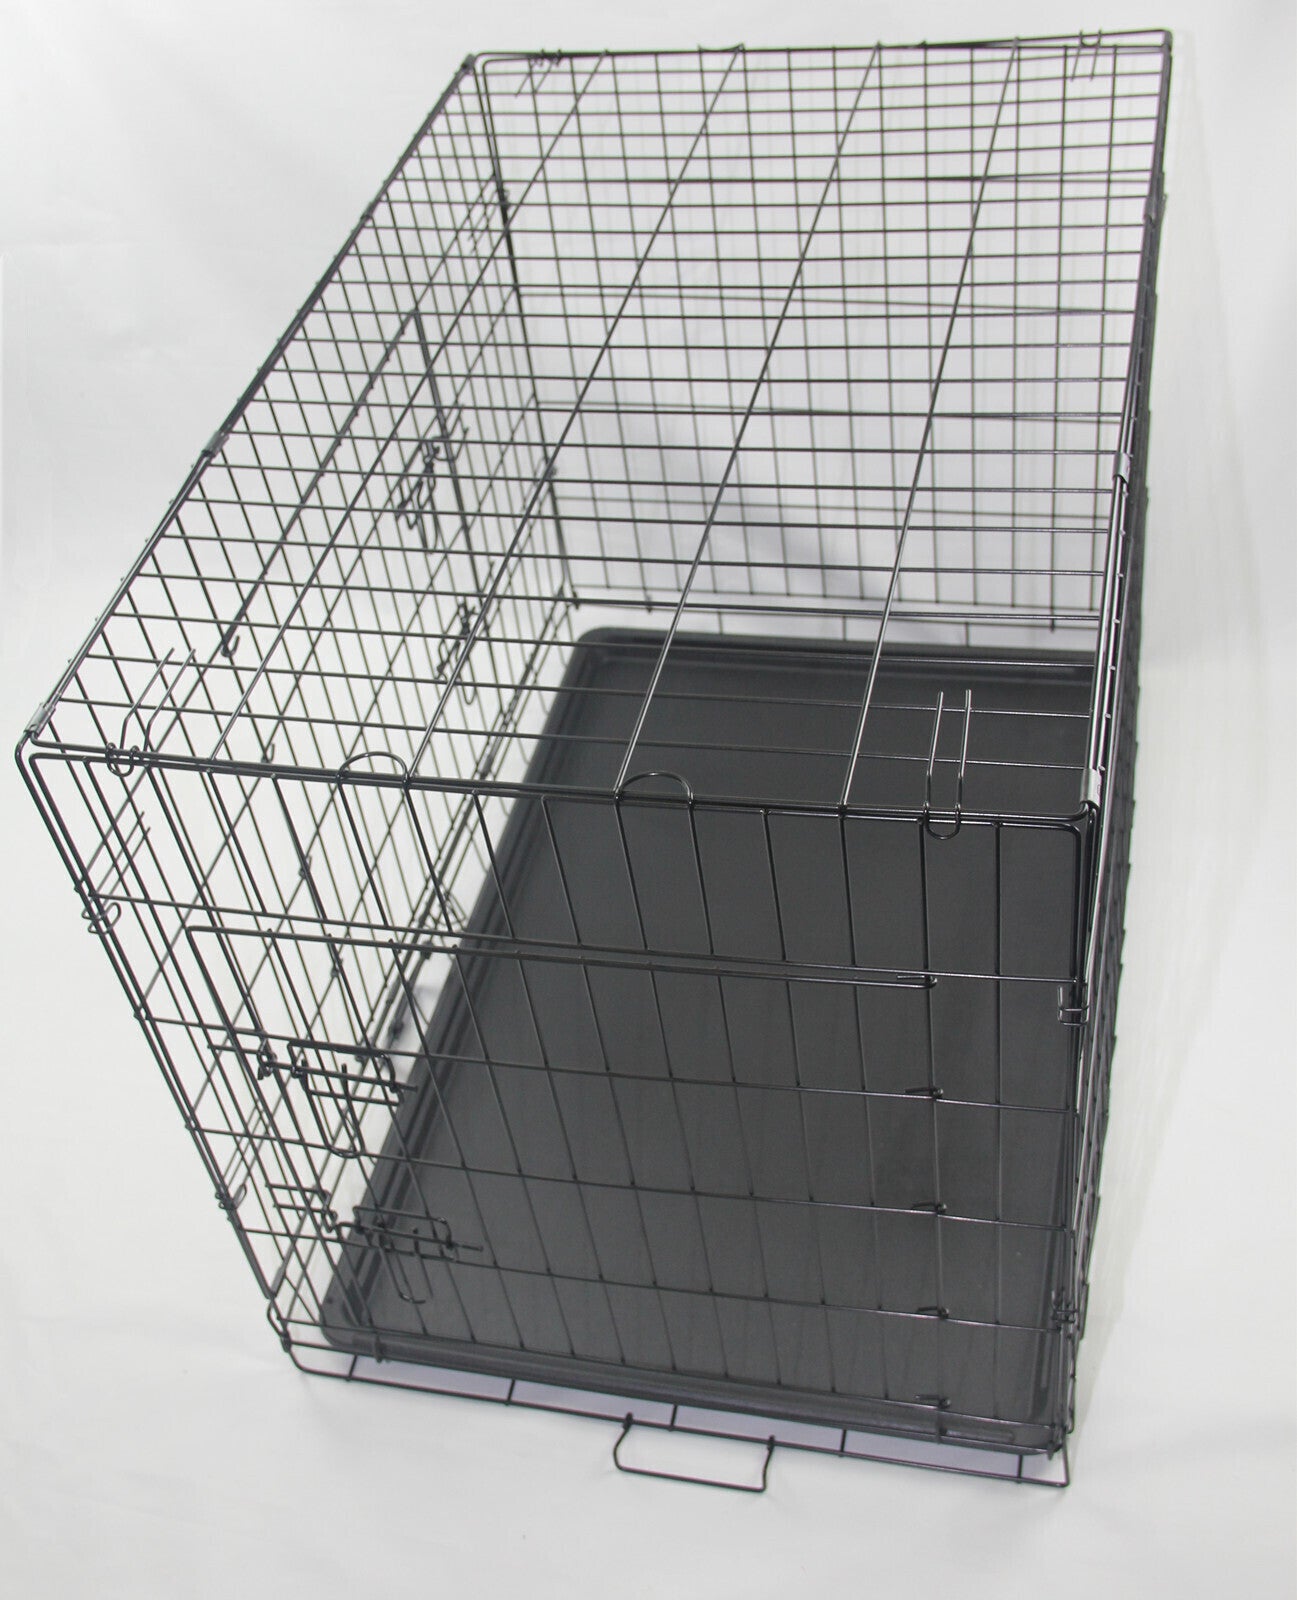 30' Portable Foldable Dog Cat Rabbit Collapsible Crate Pet Cage with Blue Cover